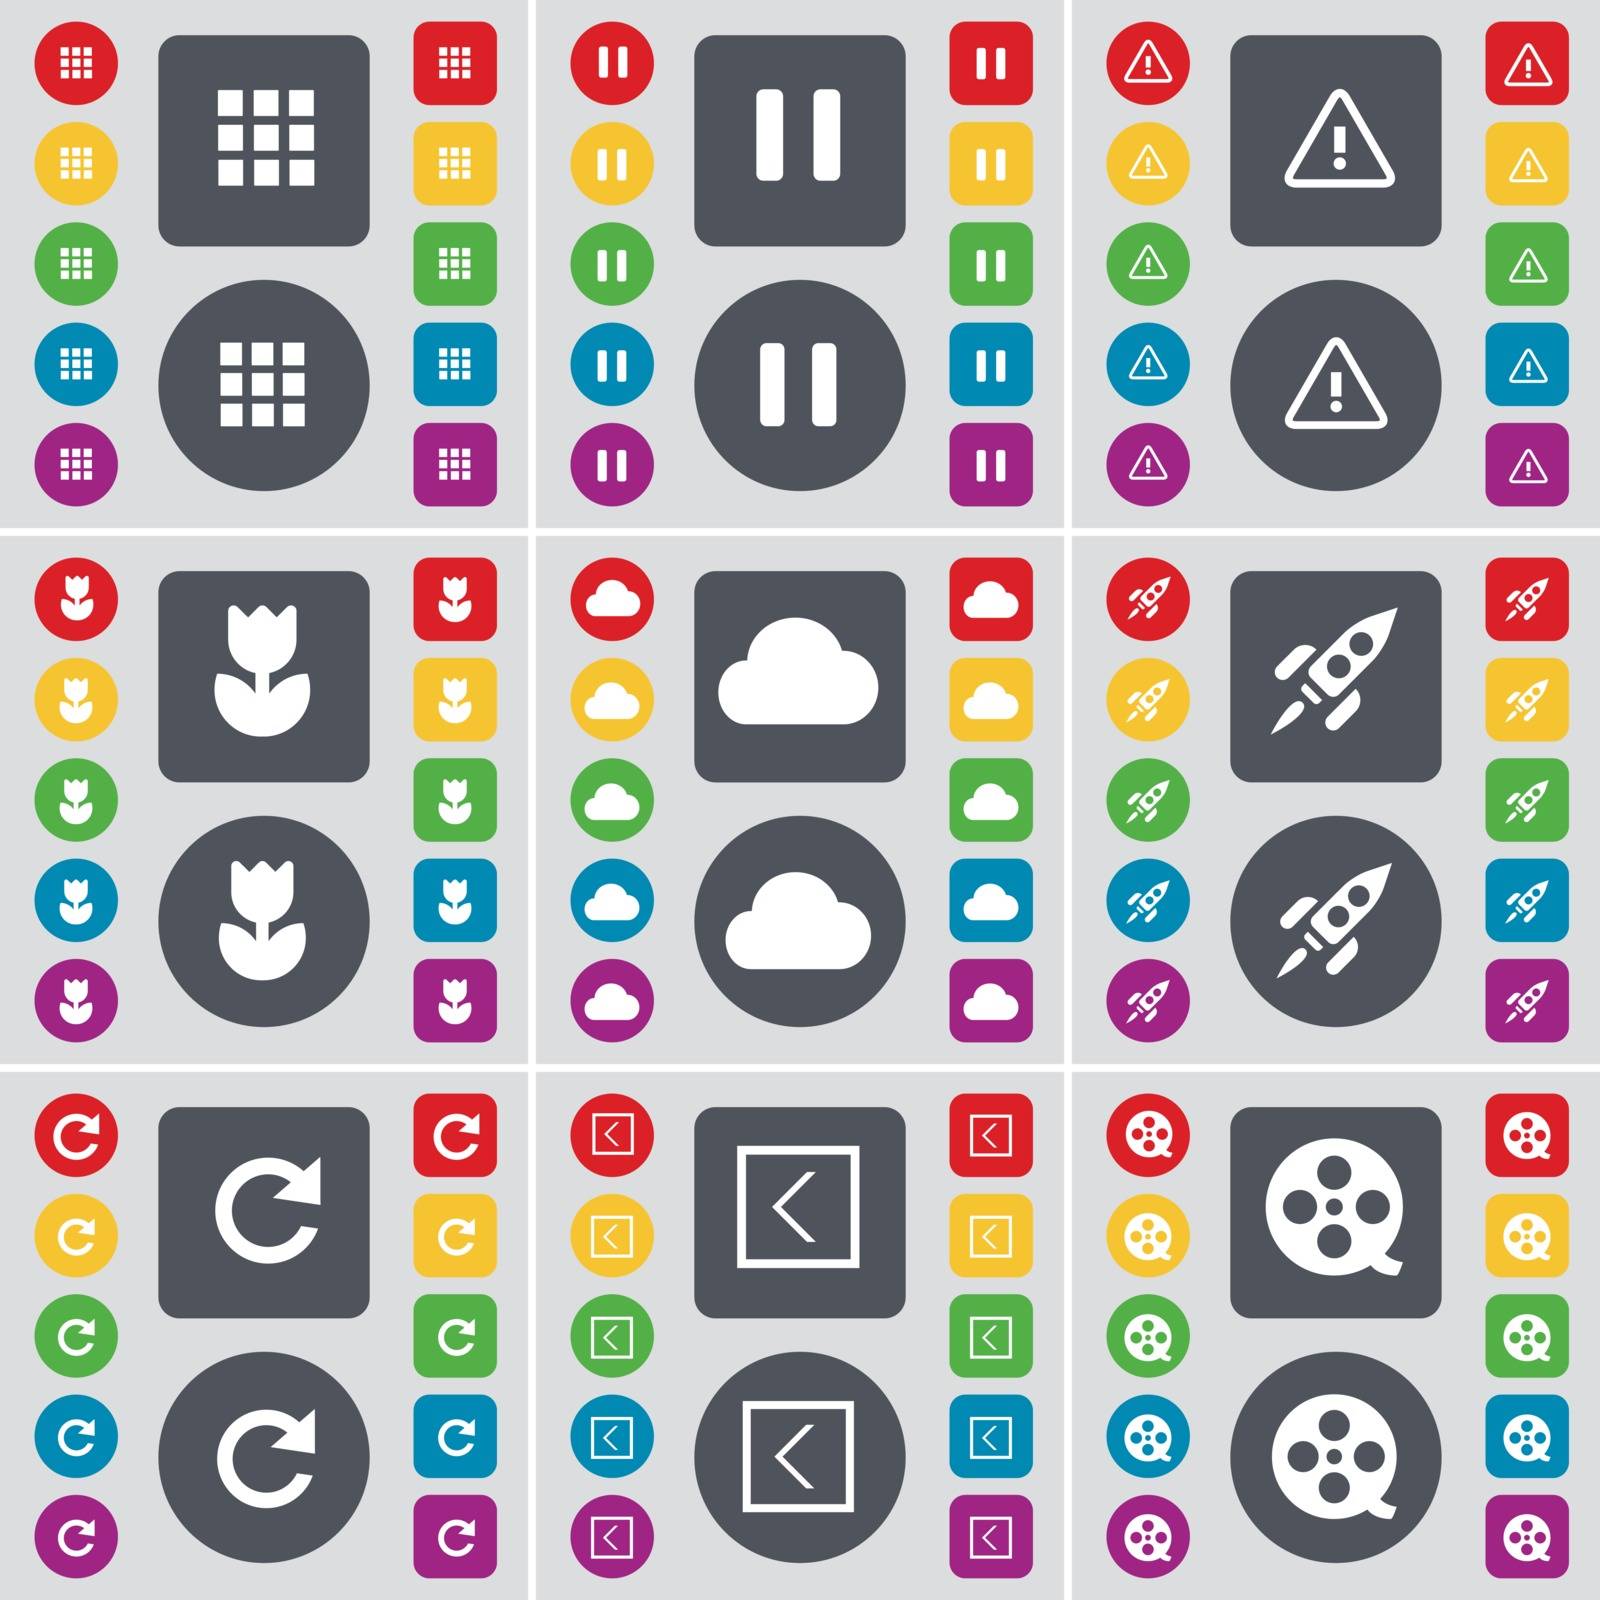 Apps, Pause, Warning, Flower, Cloud, Rocket, Reload, Arrow left, Videotape icon symbol. A large set of flat, colored buttons for your design. Vector illustration